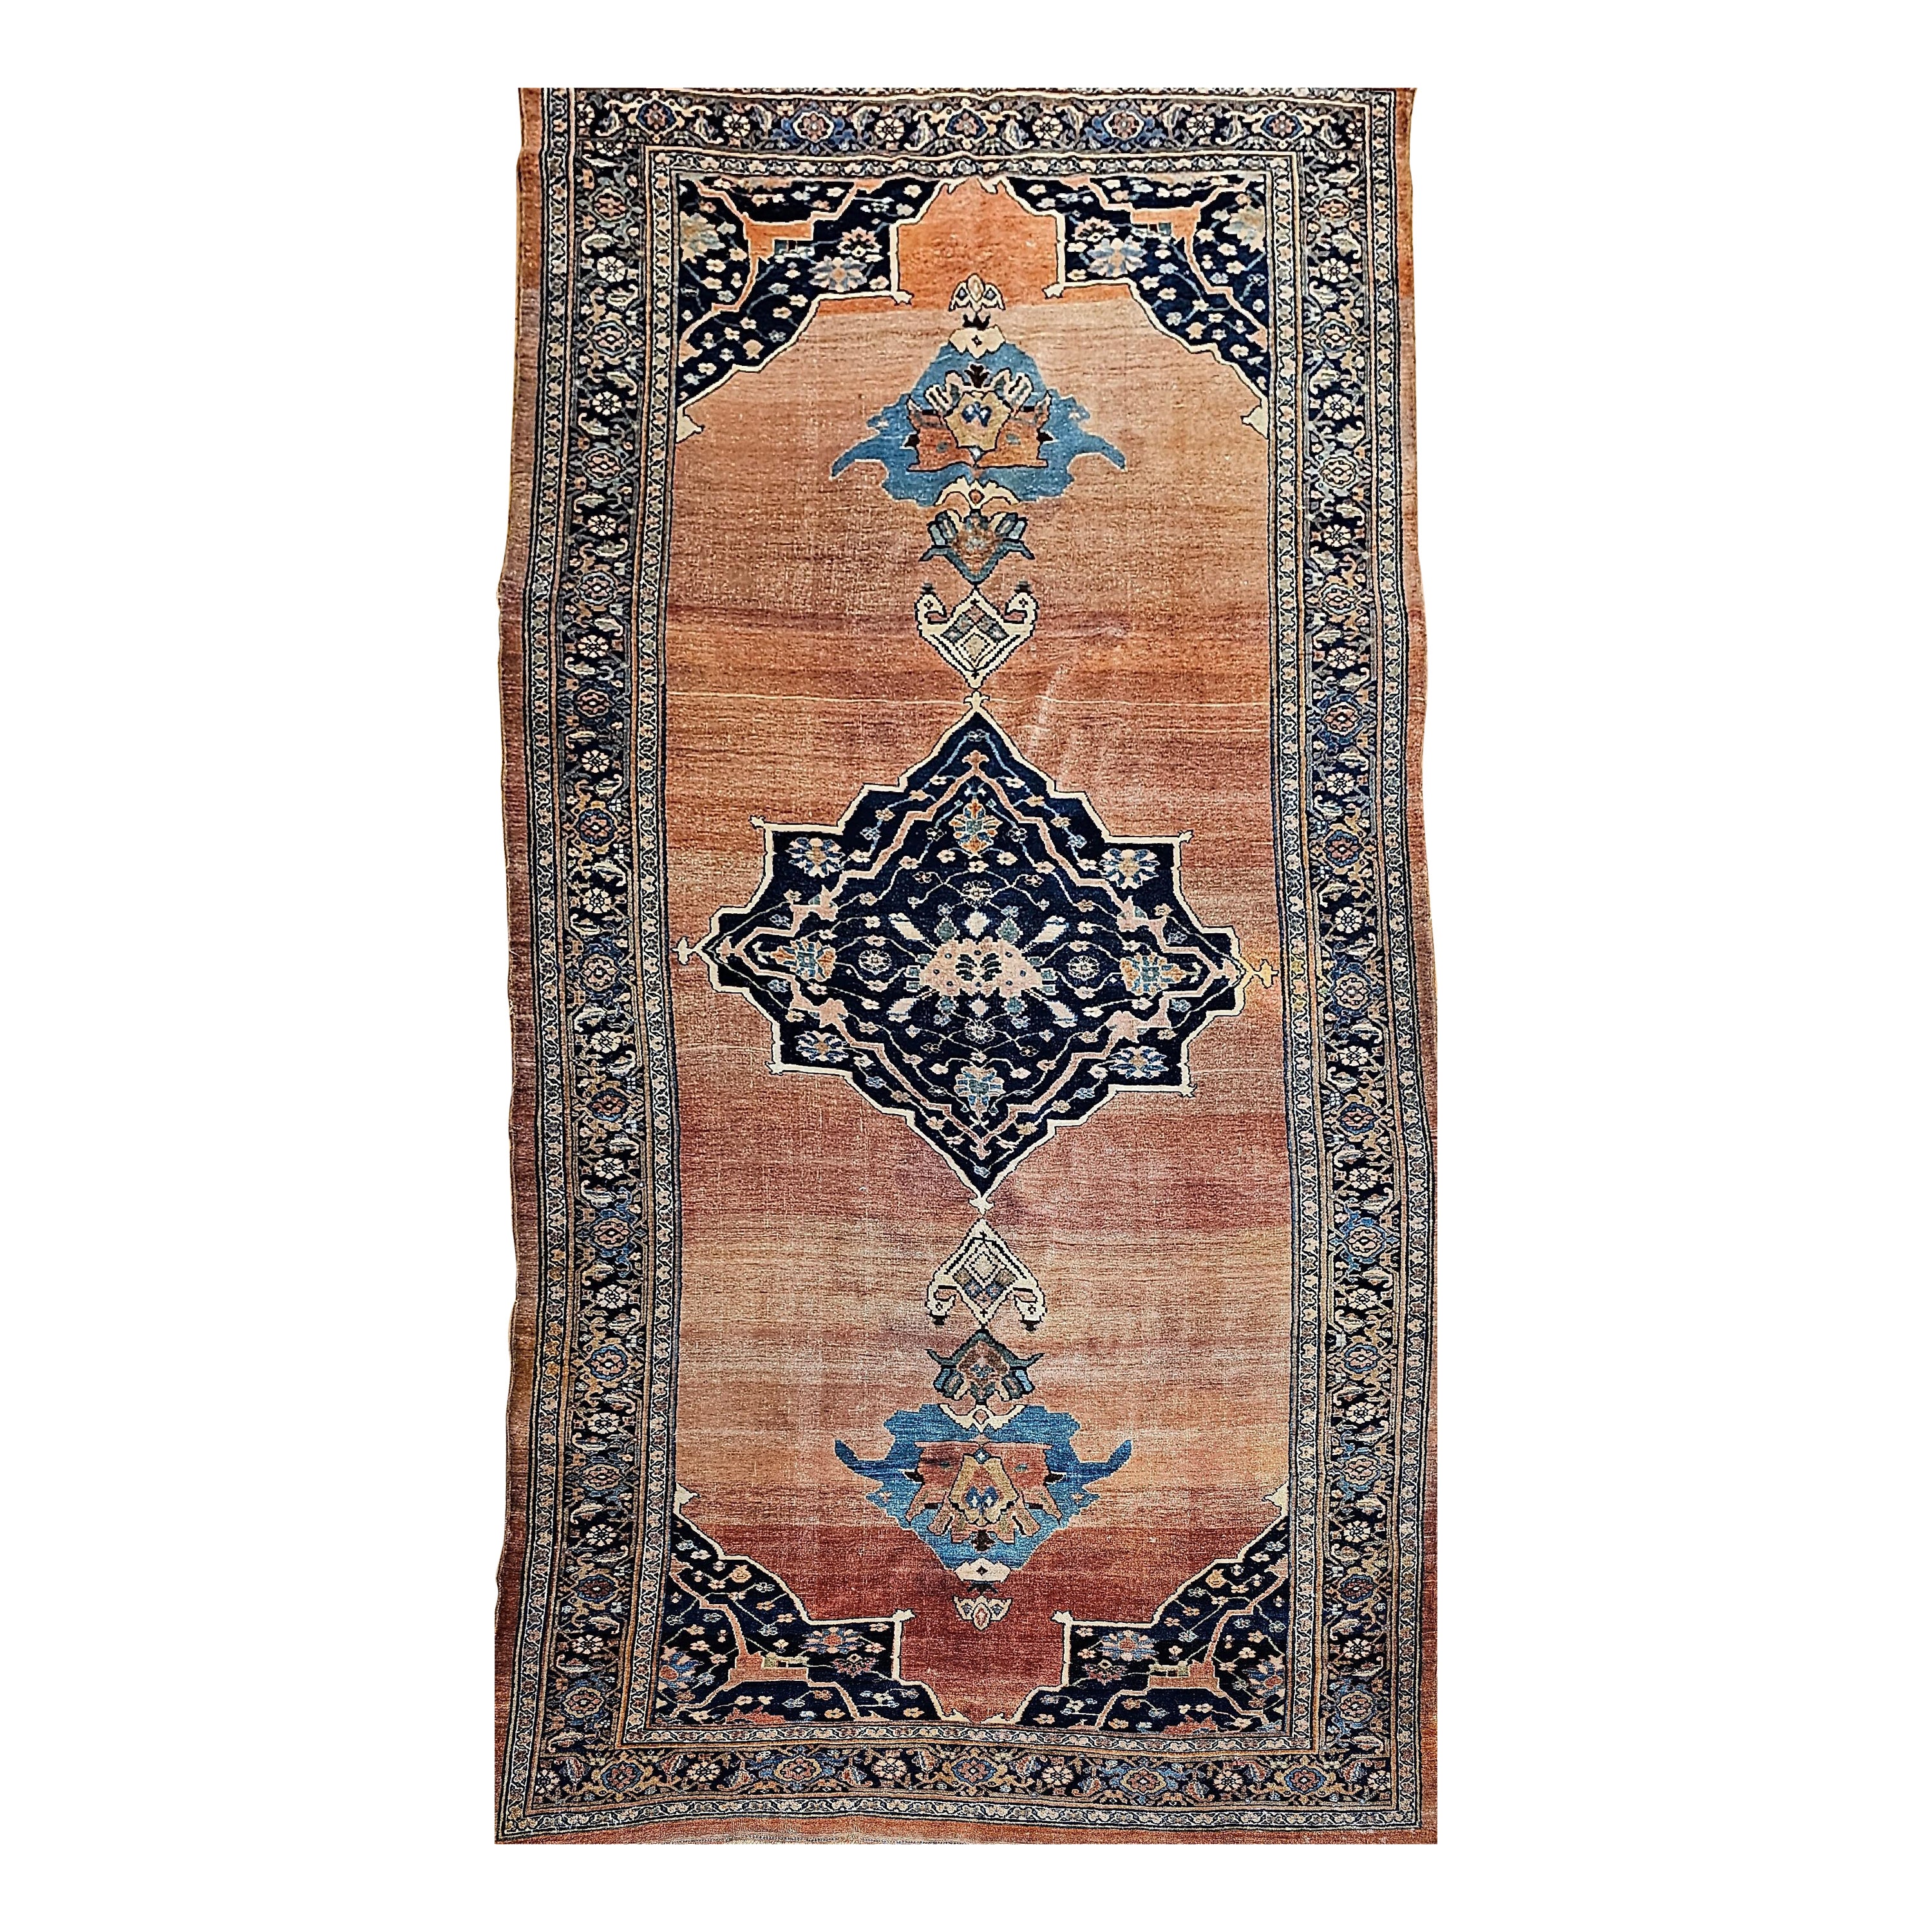 19th Century Persian Bidjar Gallery Rug in Brick-Red, Navy, Turquoise, Yellow For Sale